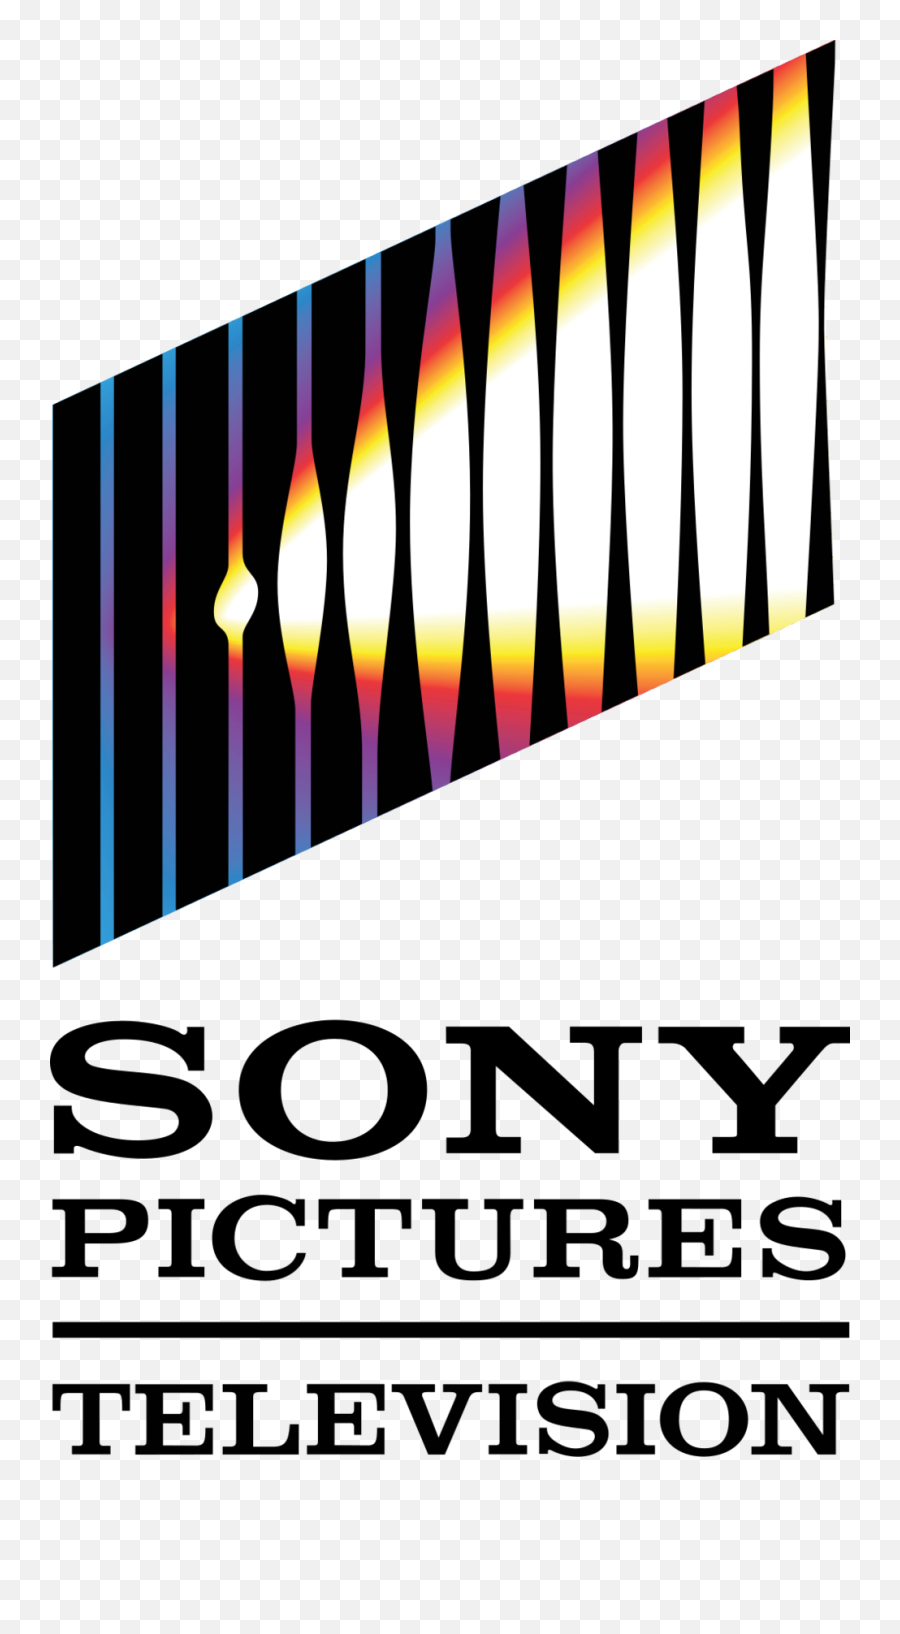 Sony Pictures Television Profiles Showcase Broadcast - Sony Pictures Television Logo Emoji,Sony Pictures Logo